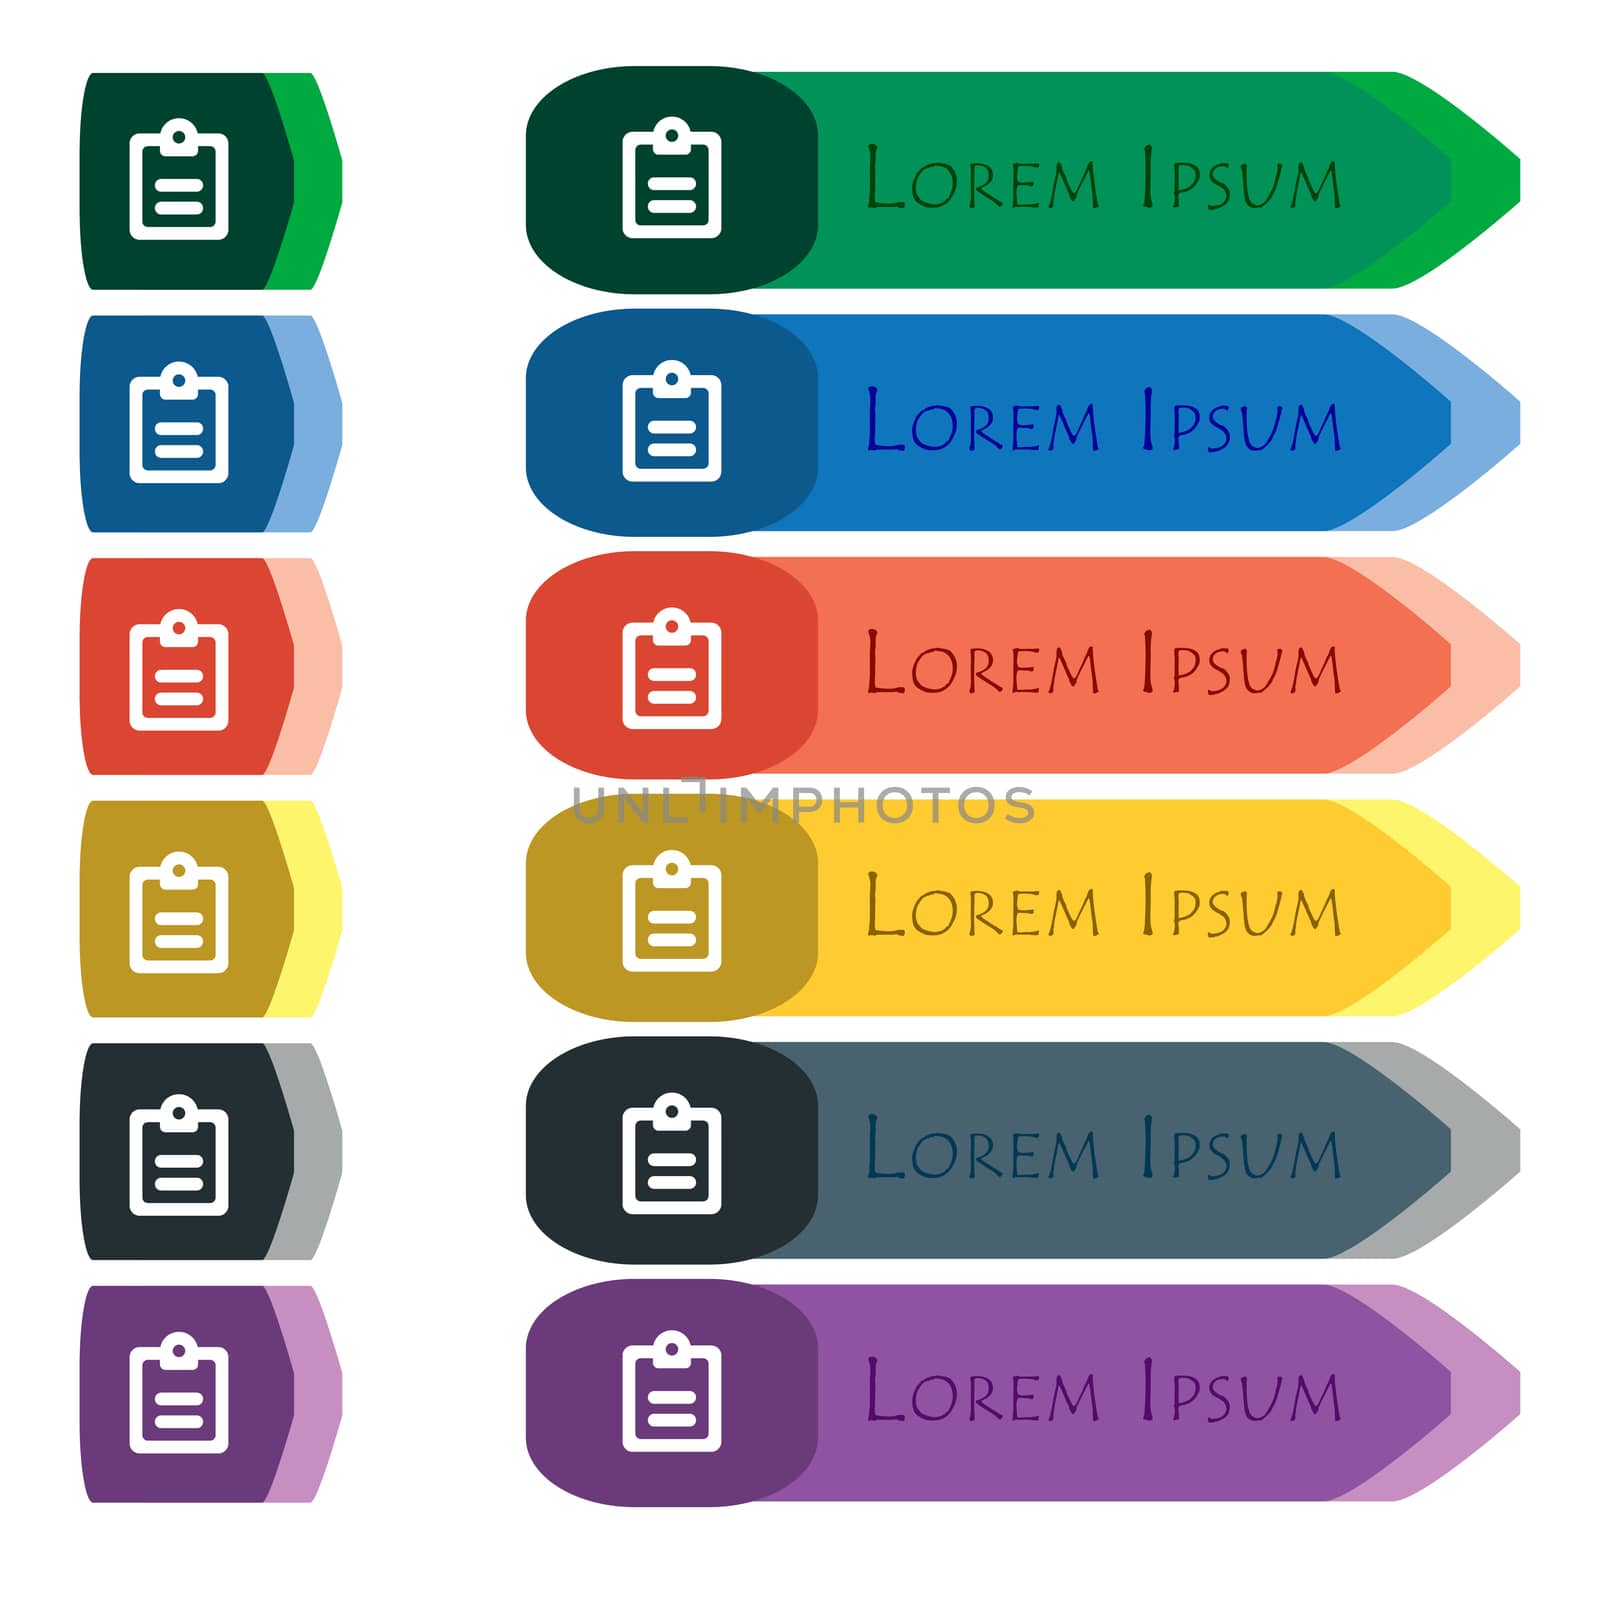 Text file icon sign. Set of colorful, bright long buttons with additional small modules. Flat design. 